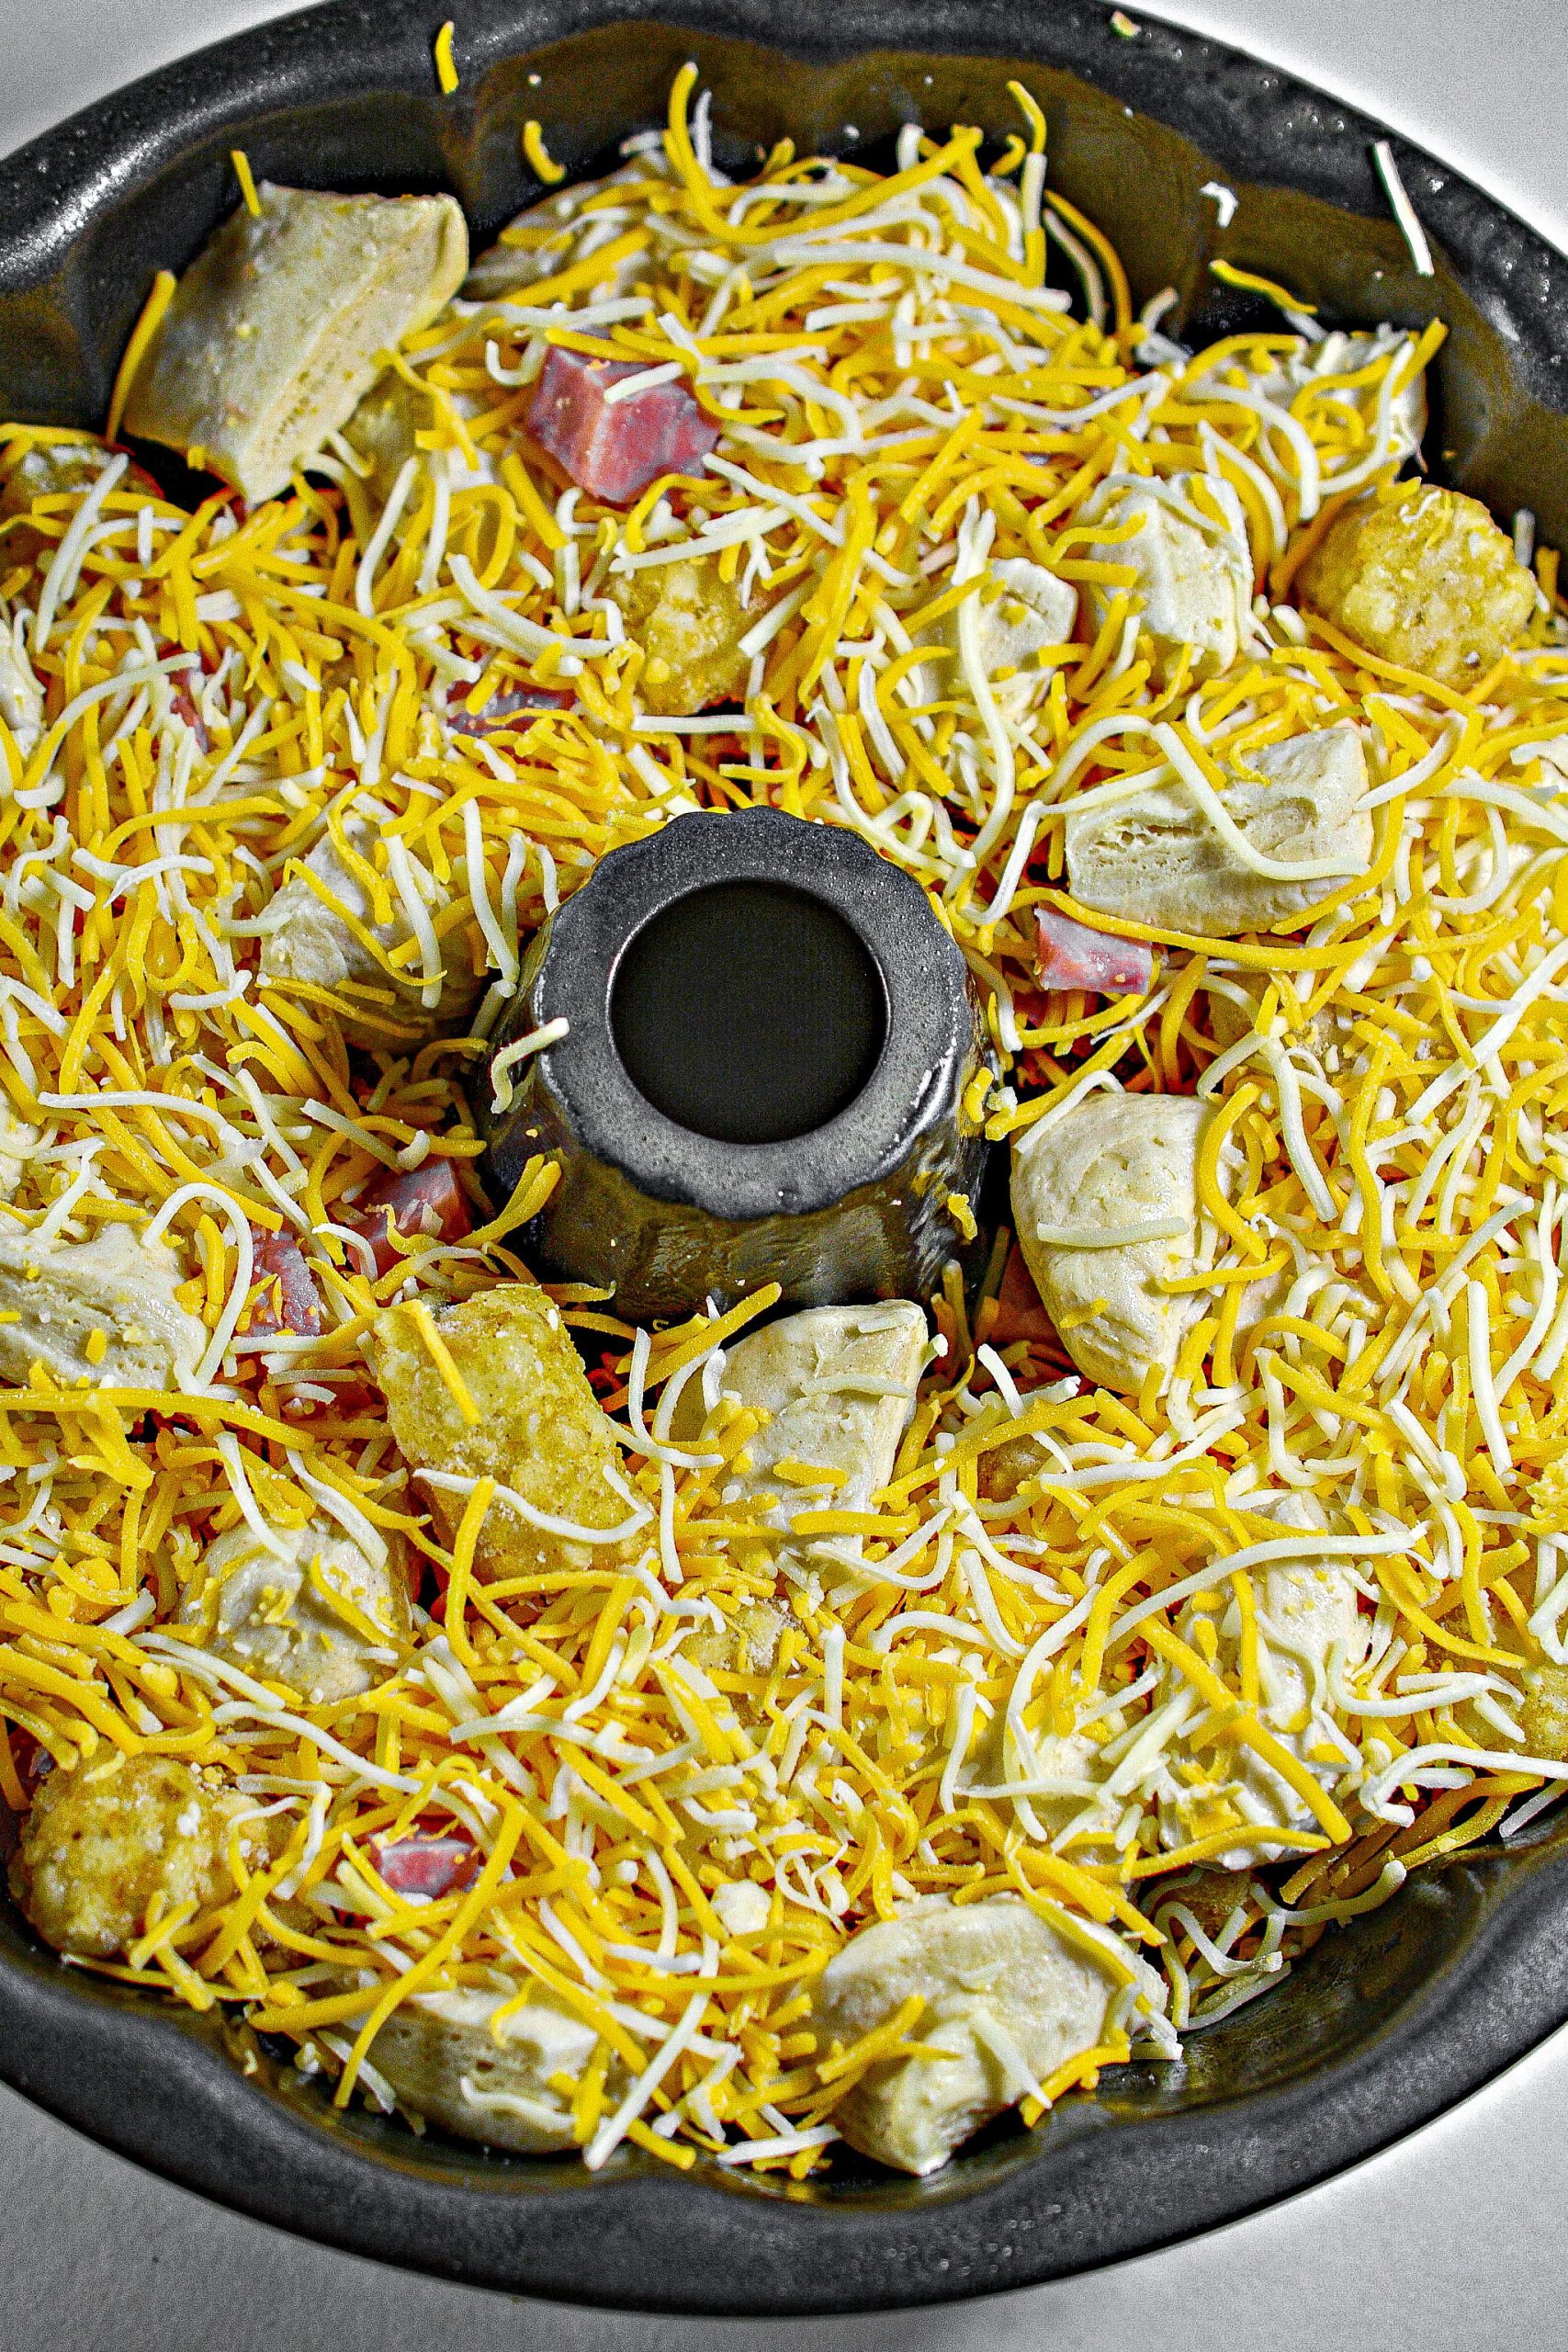 Mix together the ham, tater tots, cheese, and cut up biscuits in a large bowl, and place it into a well-greased bundt pan.